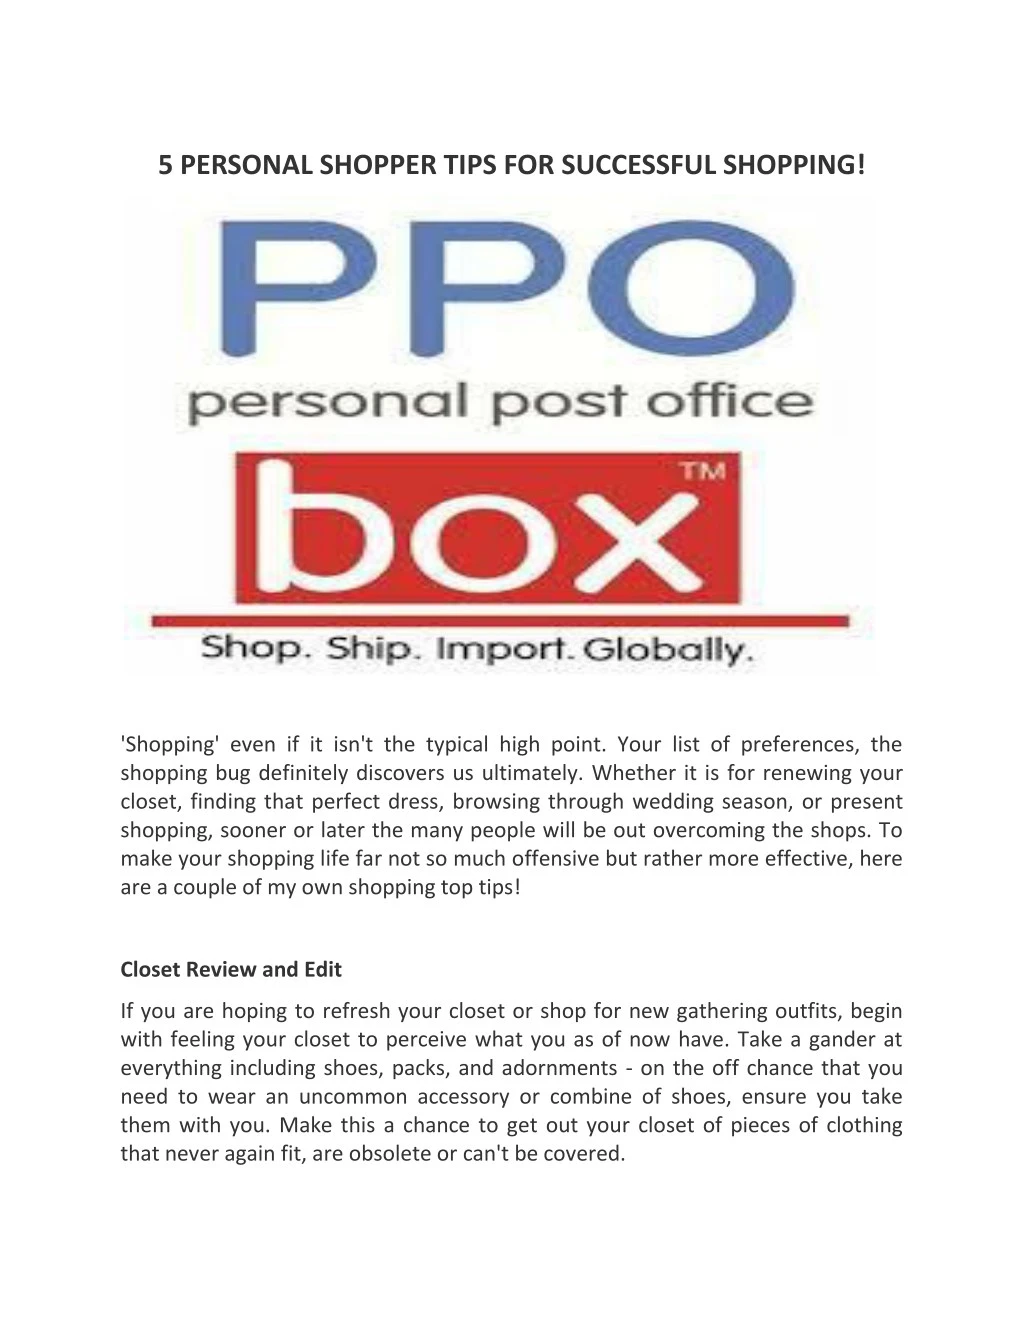 5 personal shopper tips for successful shopping